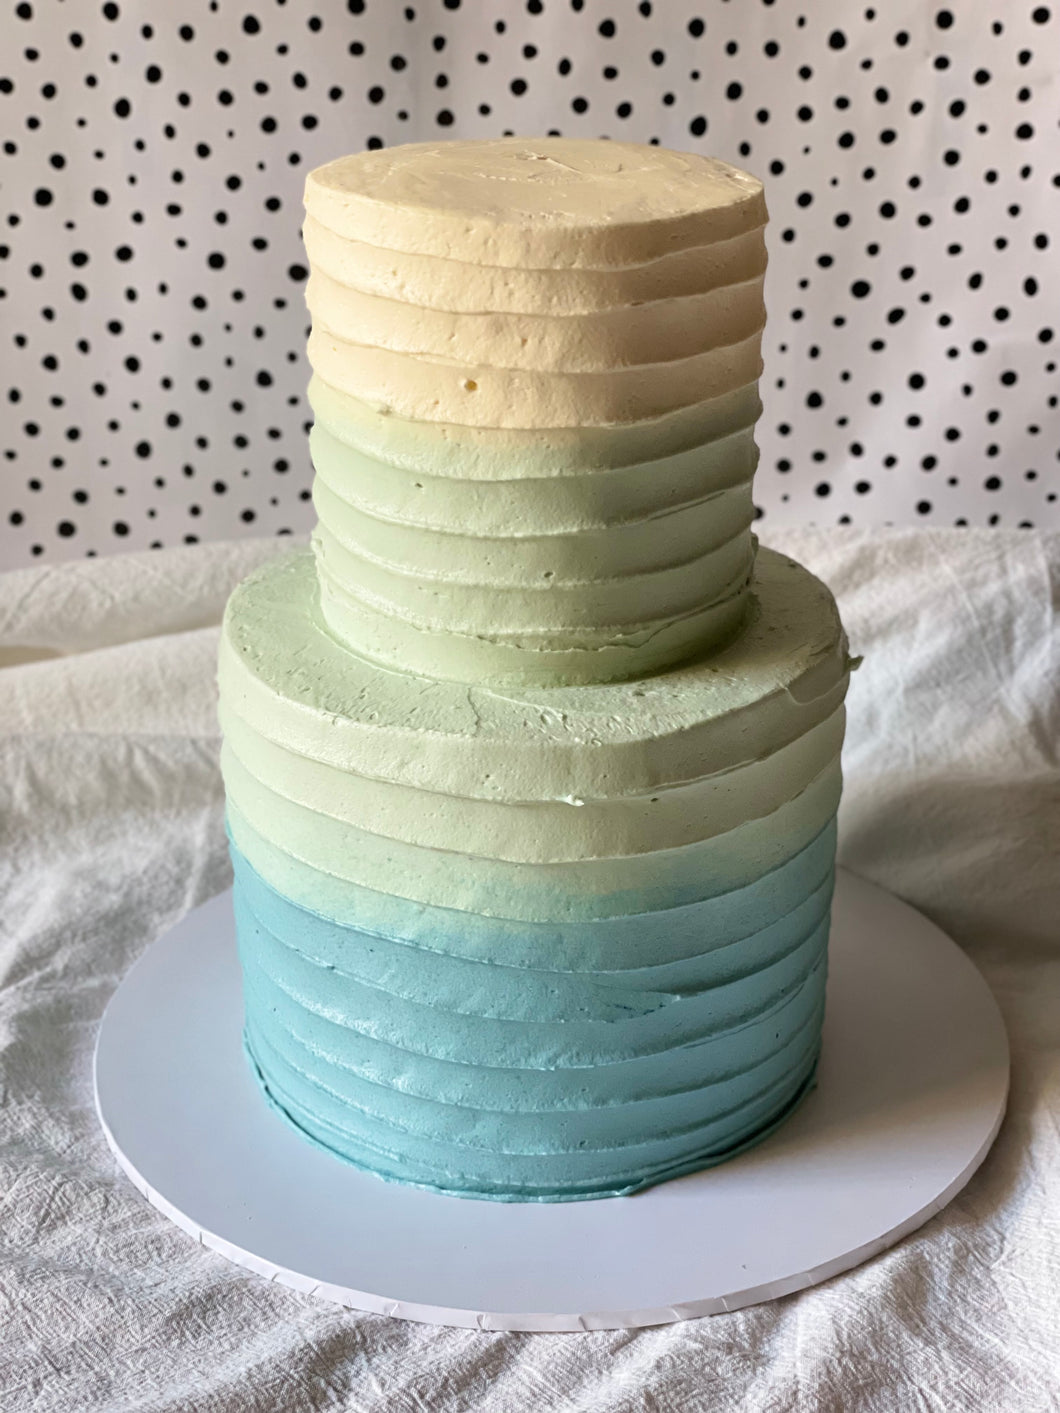 A Boy Baby Shower & How to Dye Your Own Sprinkles